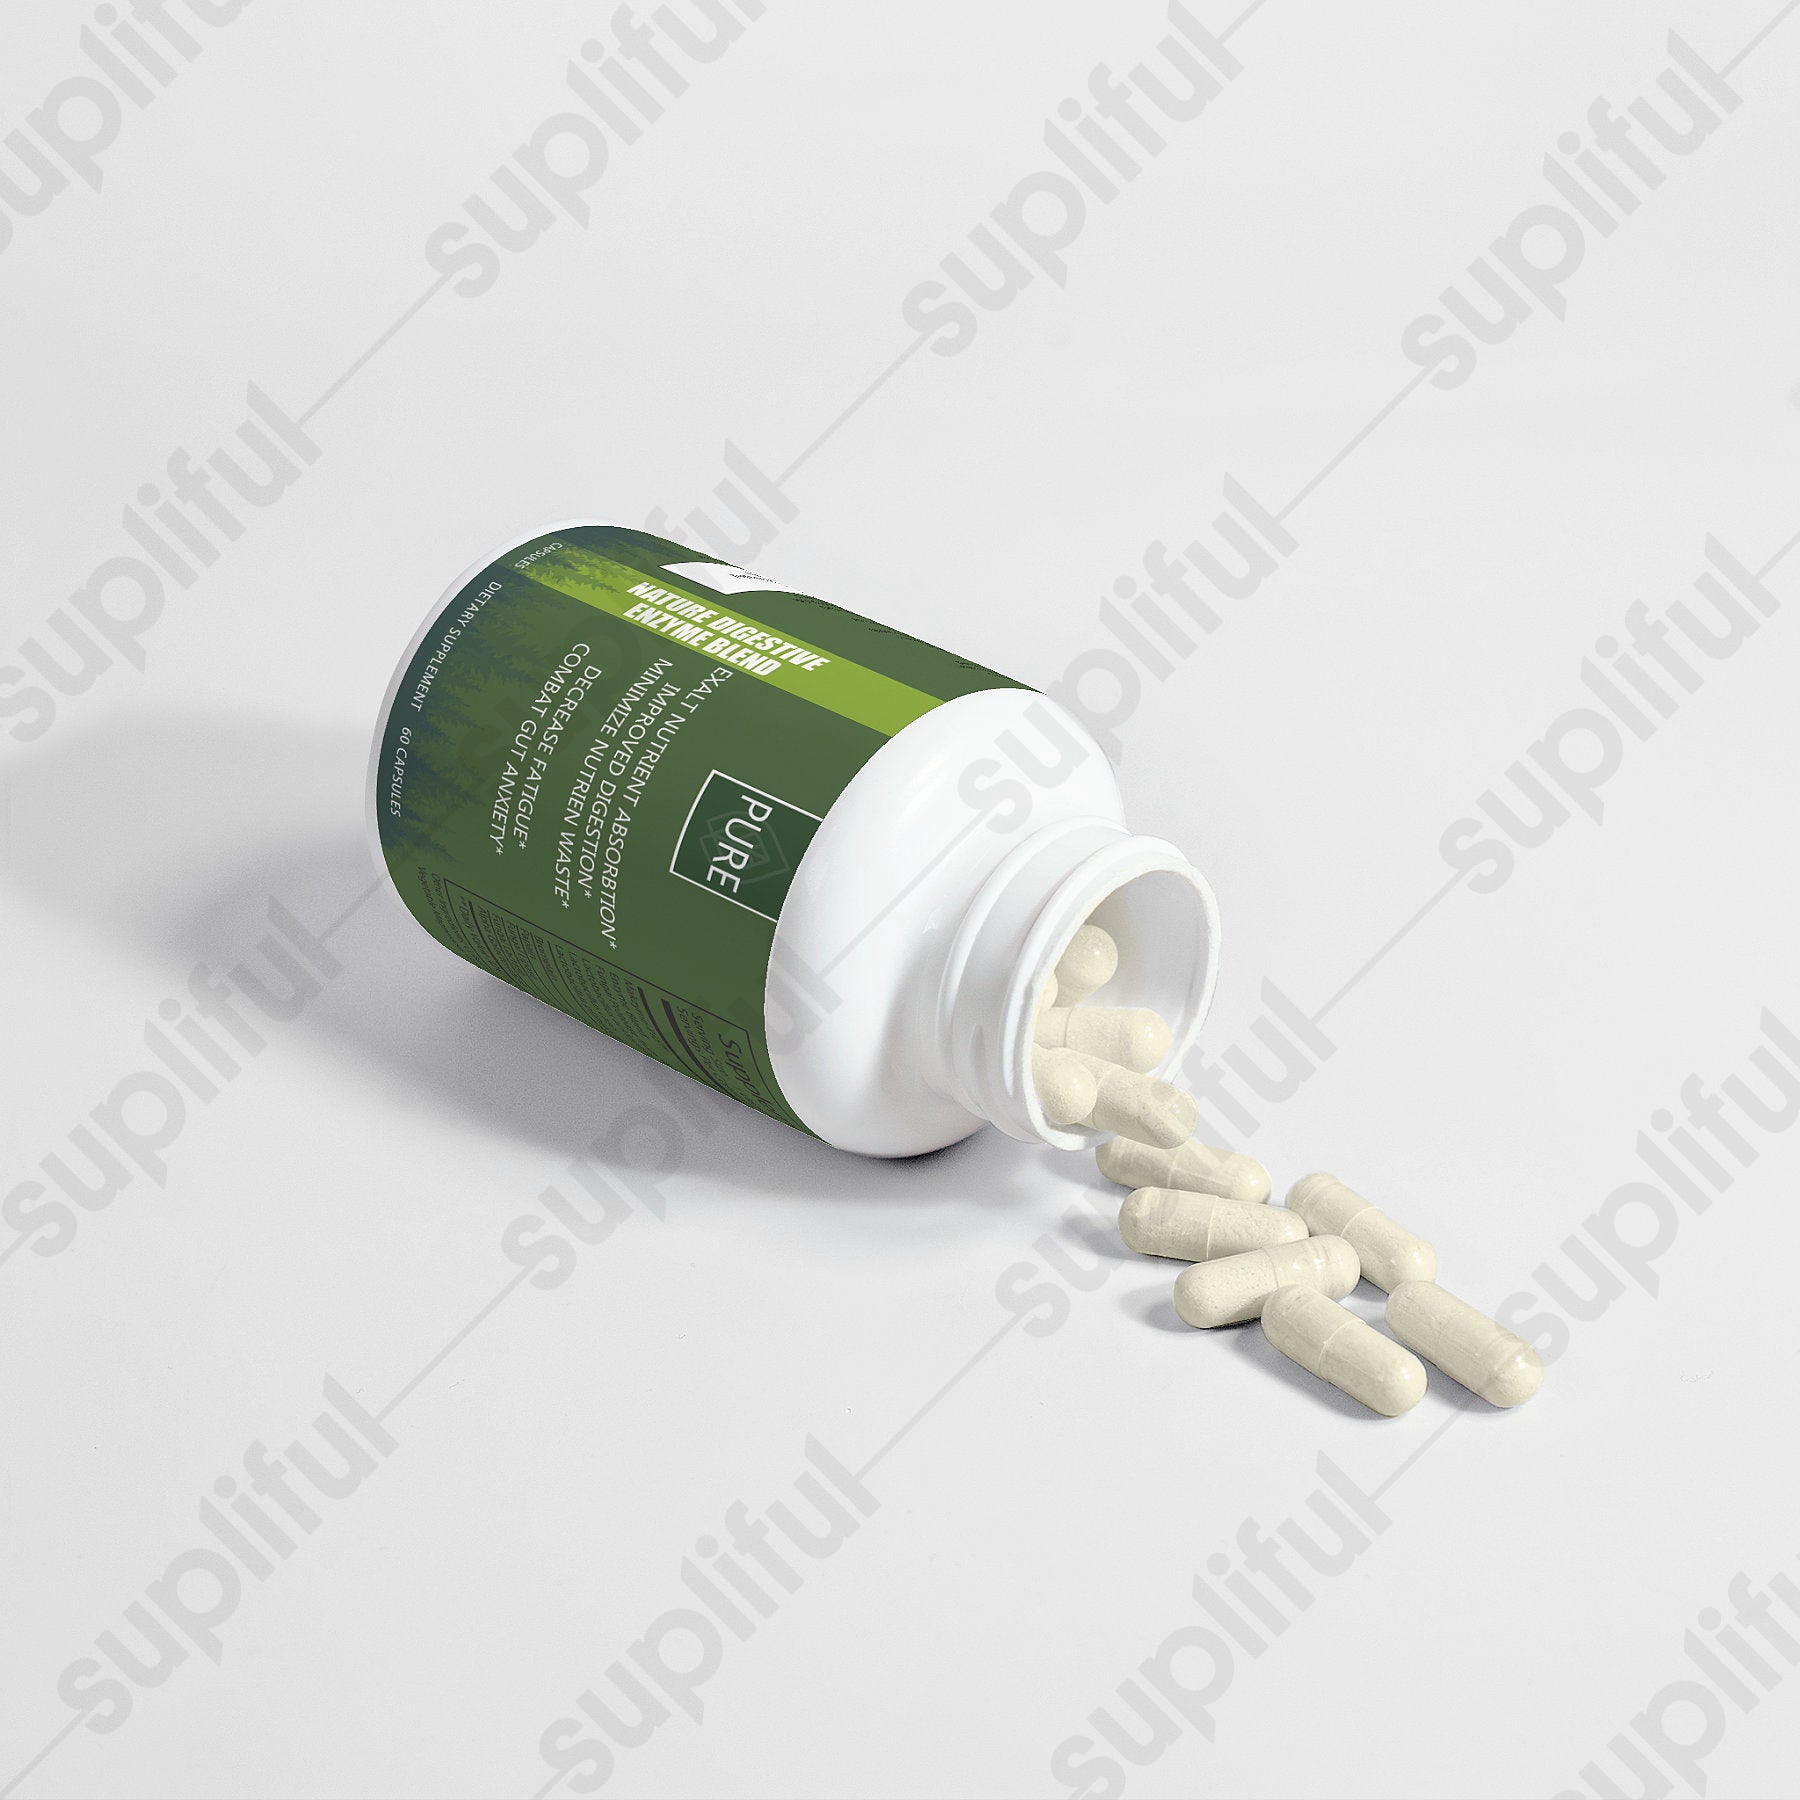 PURE. Digestive Enzyme Blend for Enhanced Nutrient Absorbtion PURE Supplement